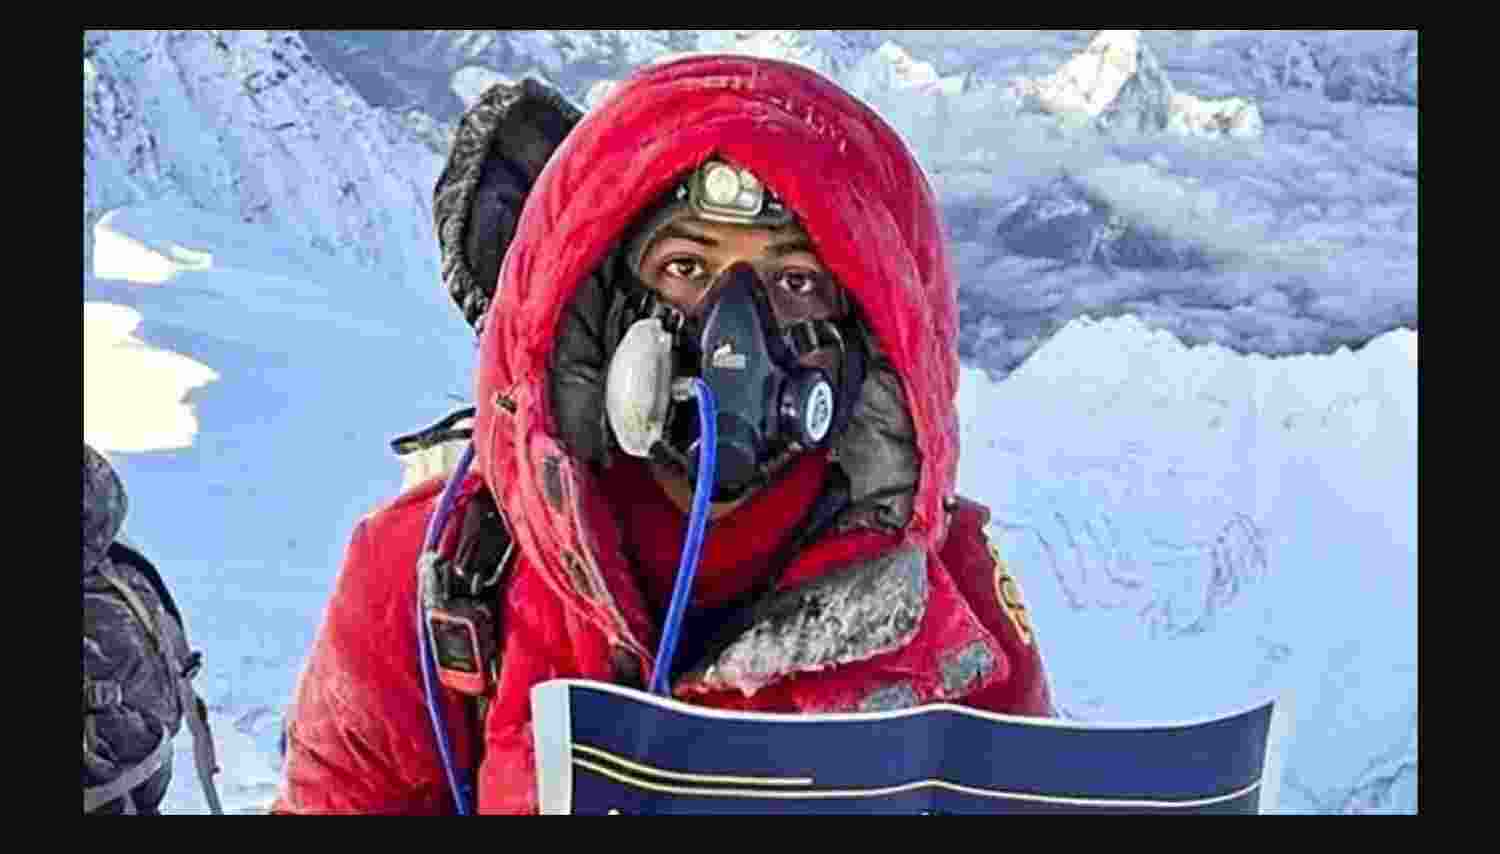 Indian sets dual ascent record on Everest, Lhotse